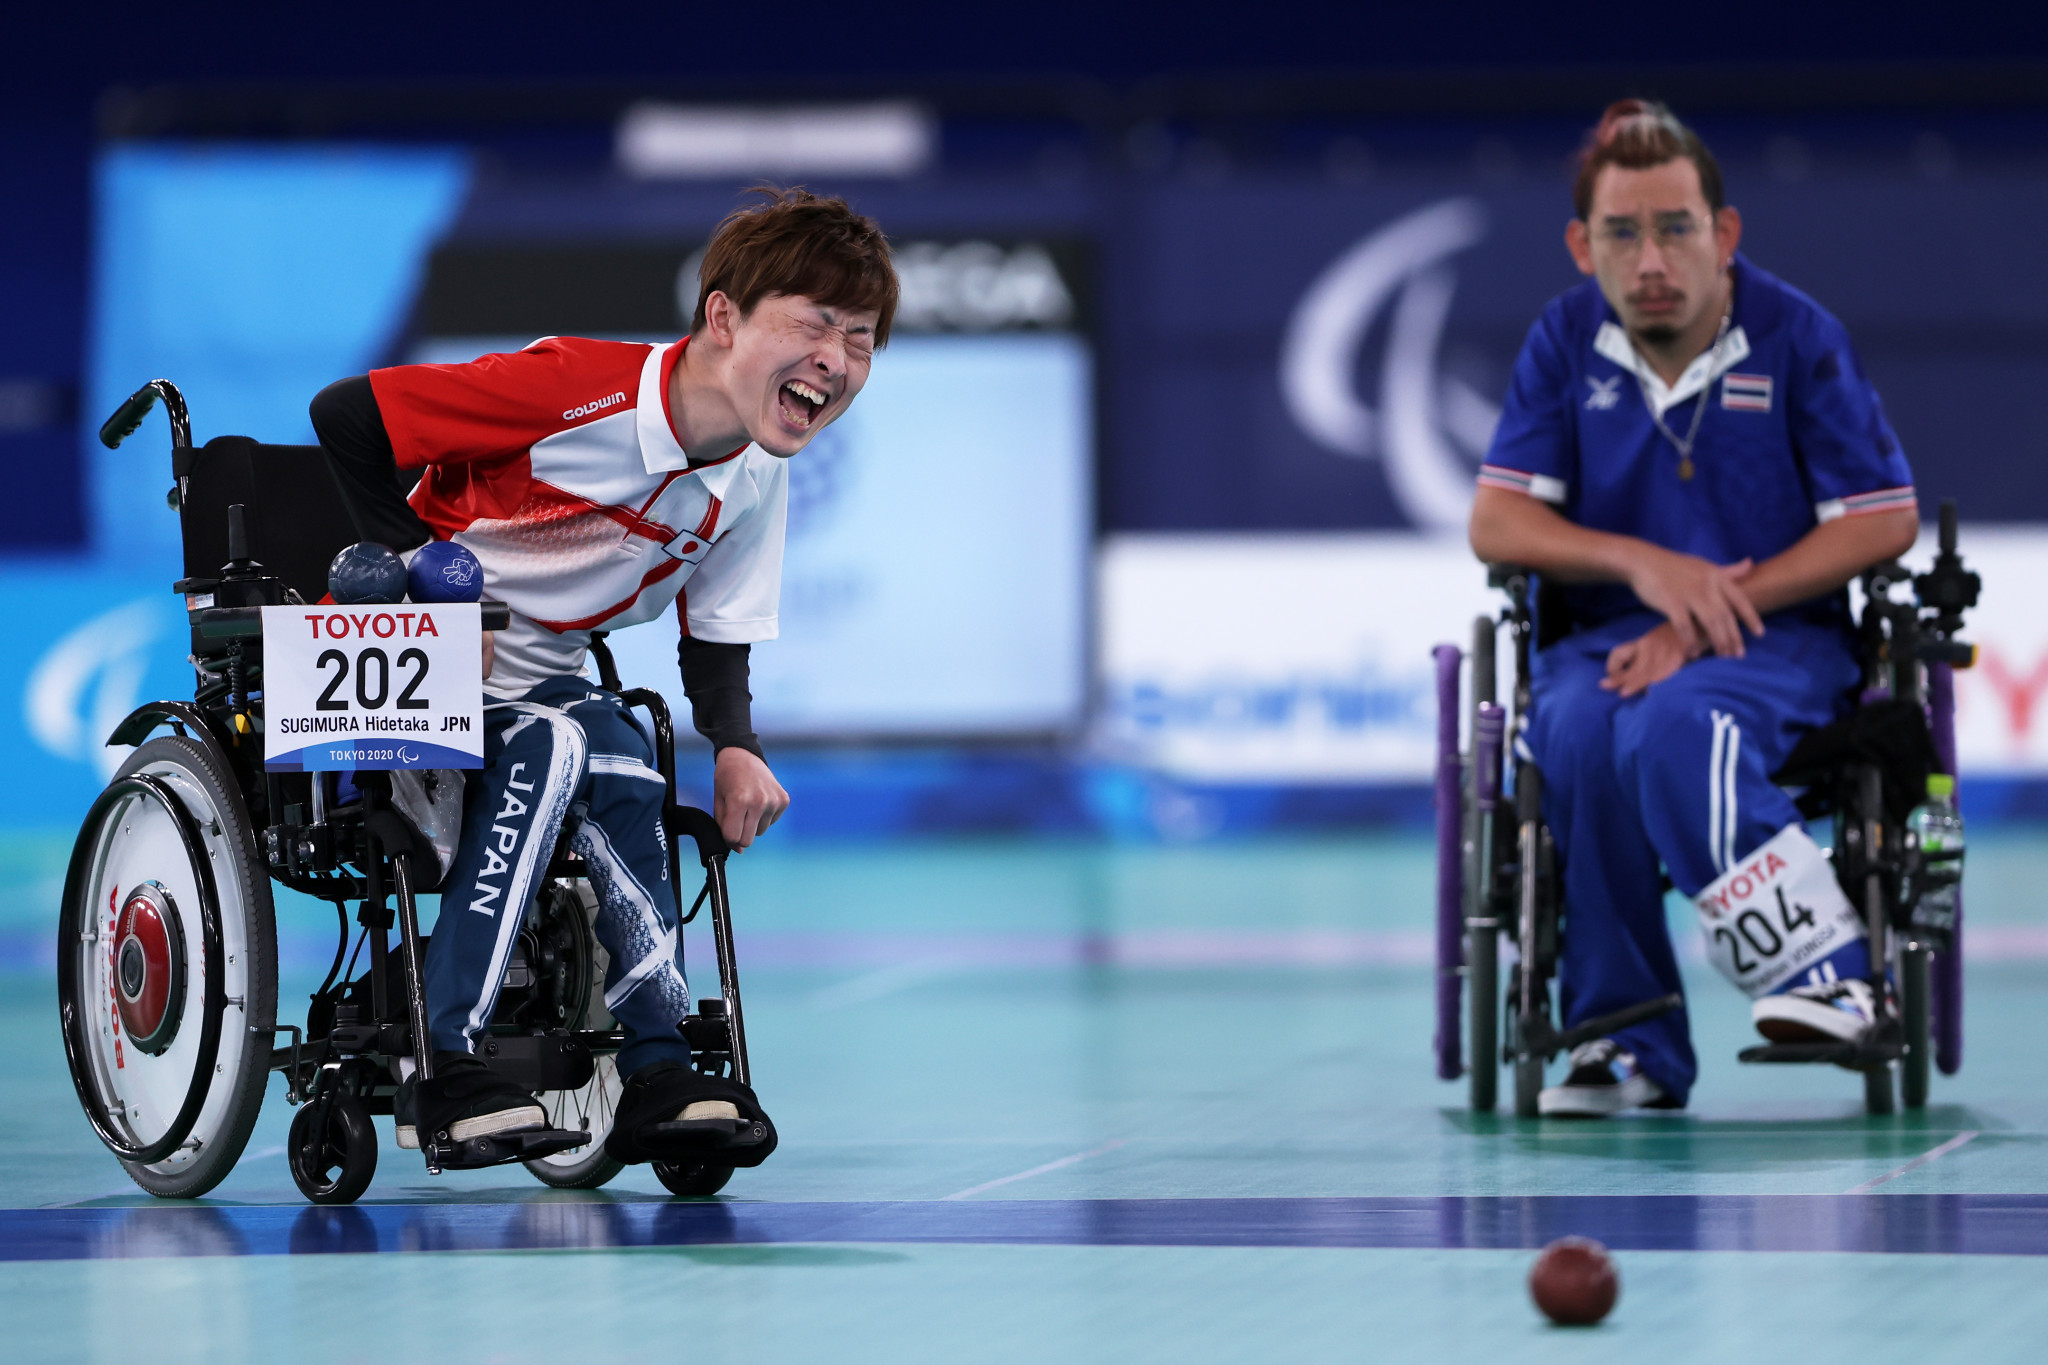 The Tokyo 2020 Paralympics represented the only major boccia event to go ahead in 2021 ©Getty Images